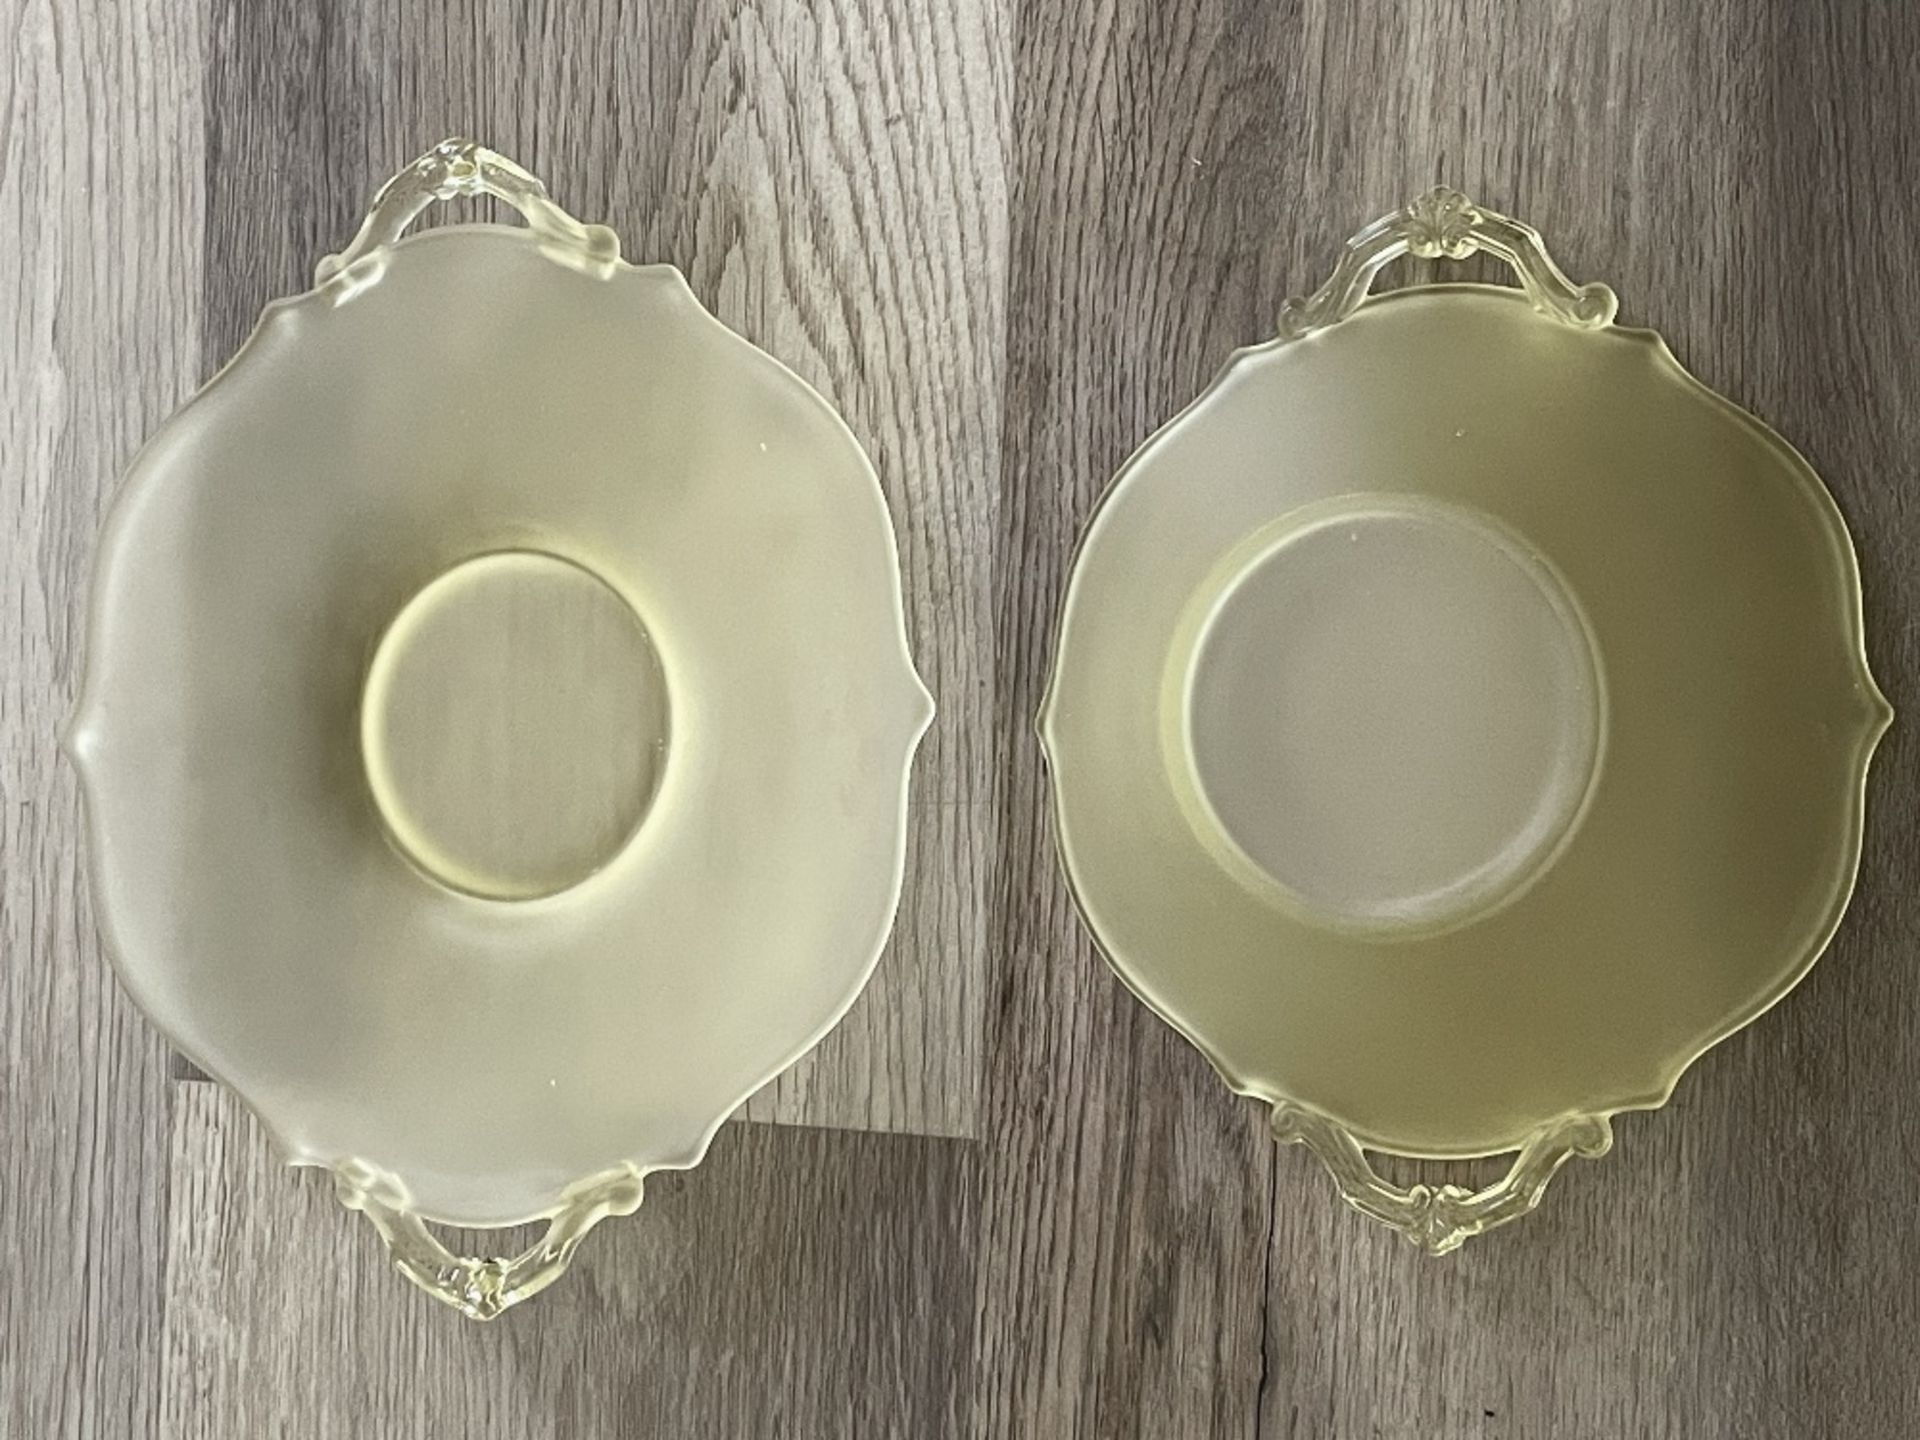 Yellow Depression Era Glass Serving Bowl and Plate - Image 4 of 4